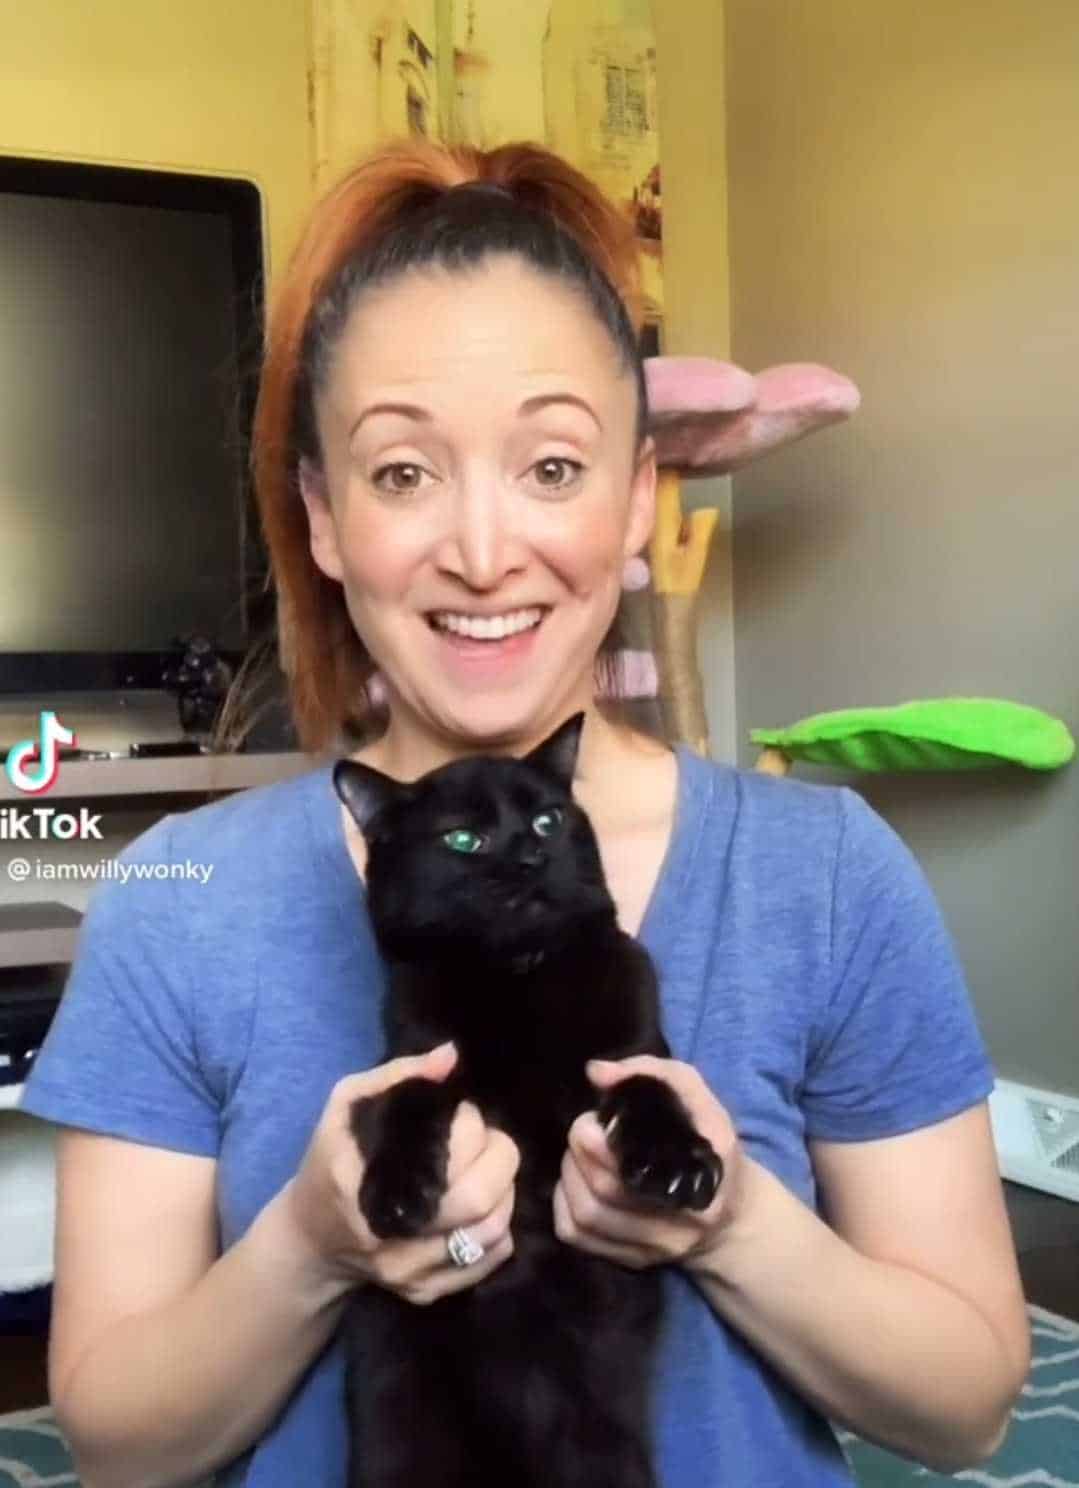 the woman is holding a black kitten